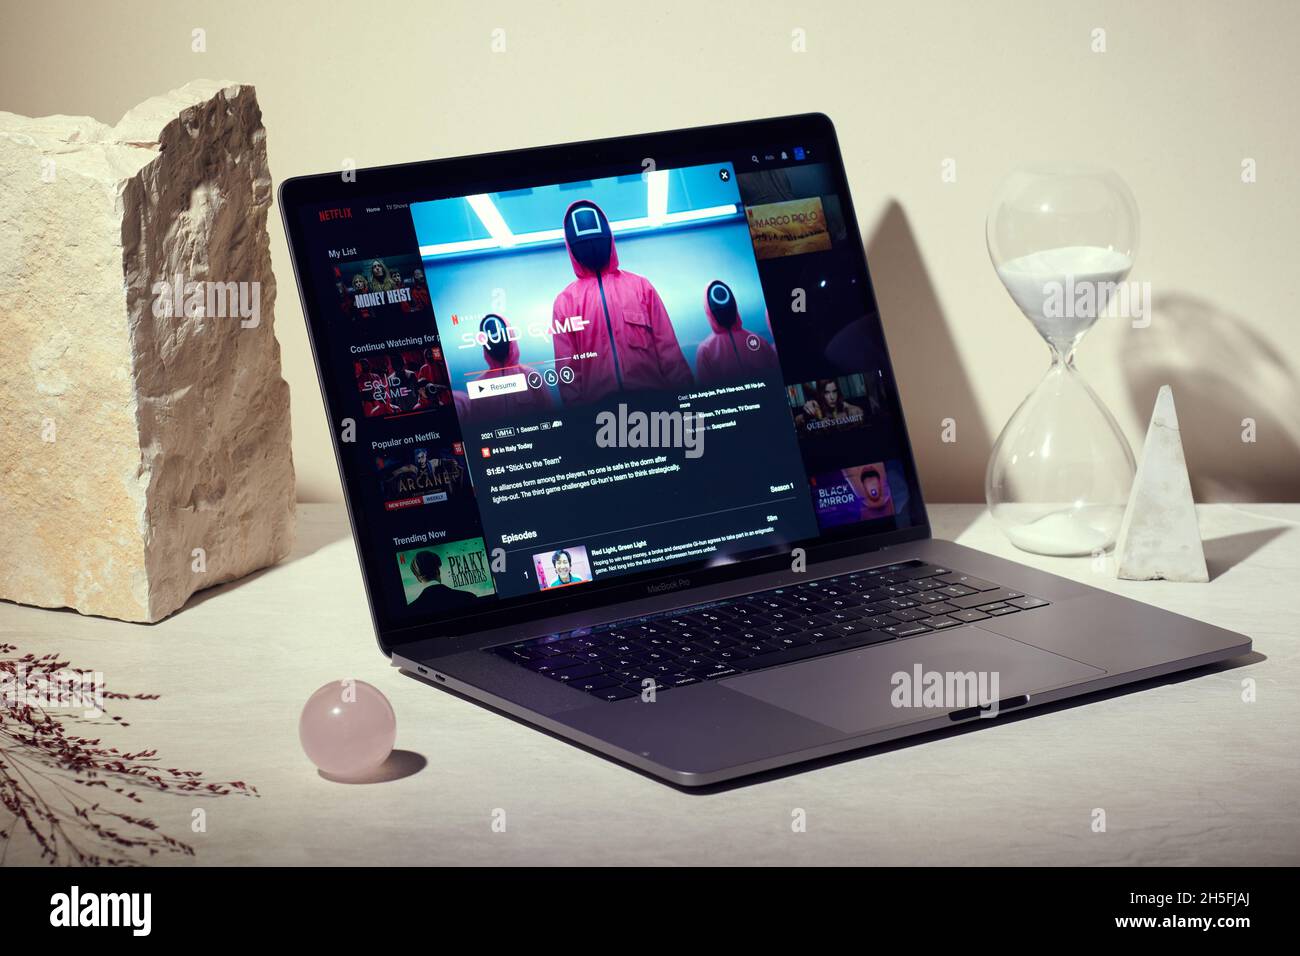 Milan, Italy - November  09, 2021: Squid Game Netflix series on laptop screen, creative interpretation. Moody and unique image from Netflix website. Stock Photo